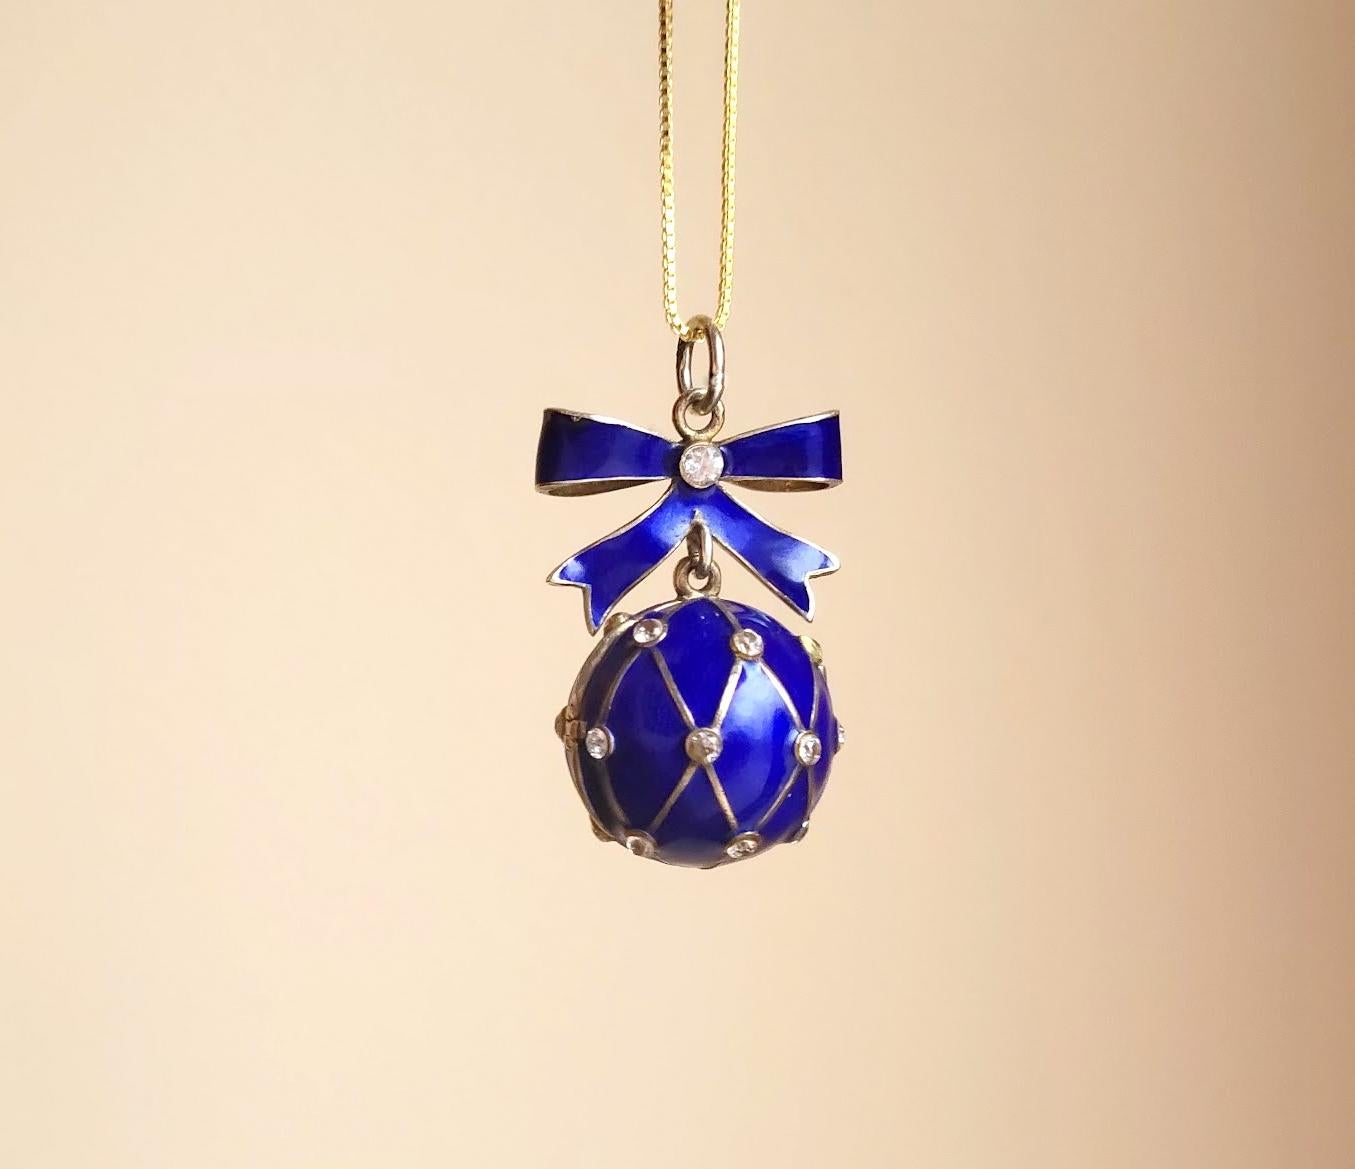 Presenting a stunning pendant designed in the shape of a Russian Imperial 88 gilt silver and enamel egg. This exquisite piece showcases a relief image of the cobalt mesh with a diamond simulant* adorned with gold and blue enamel. The loop on the